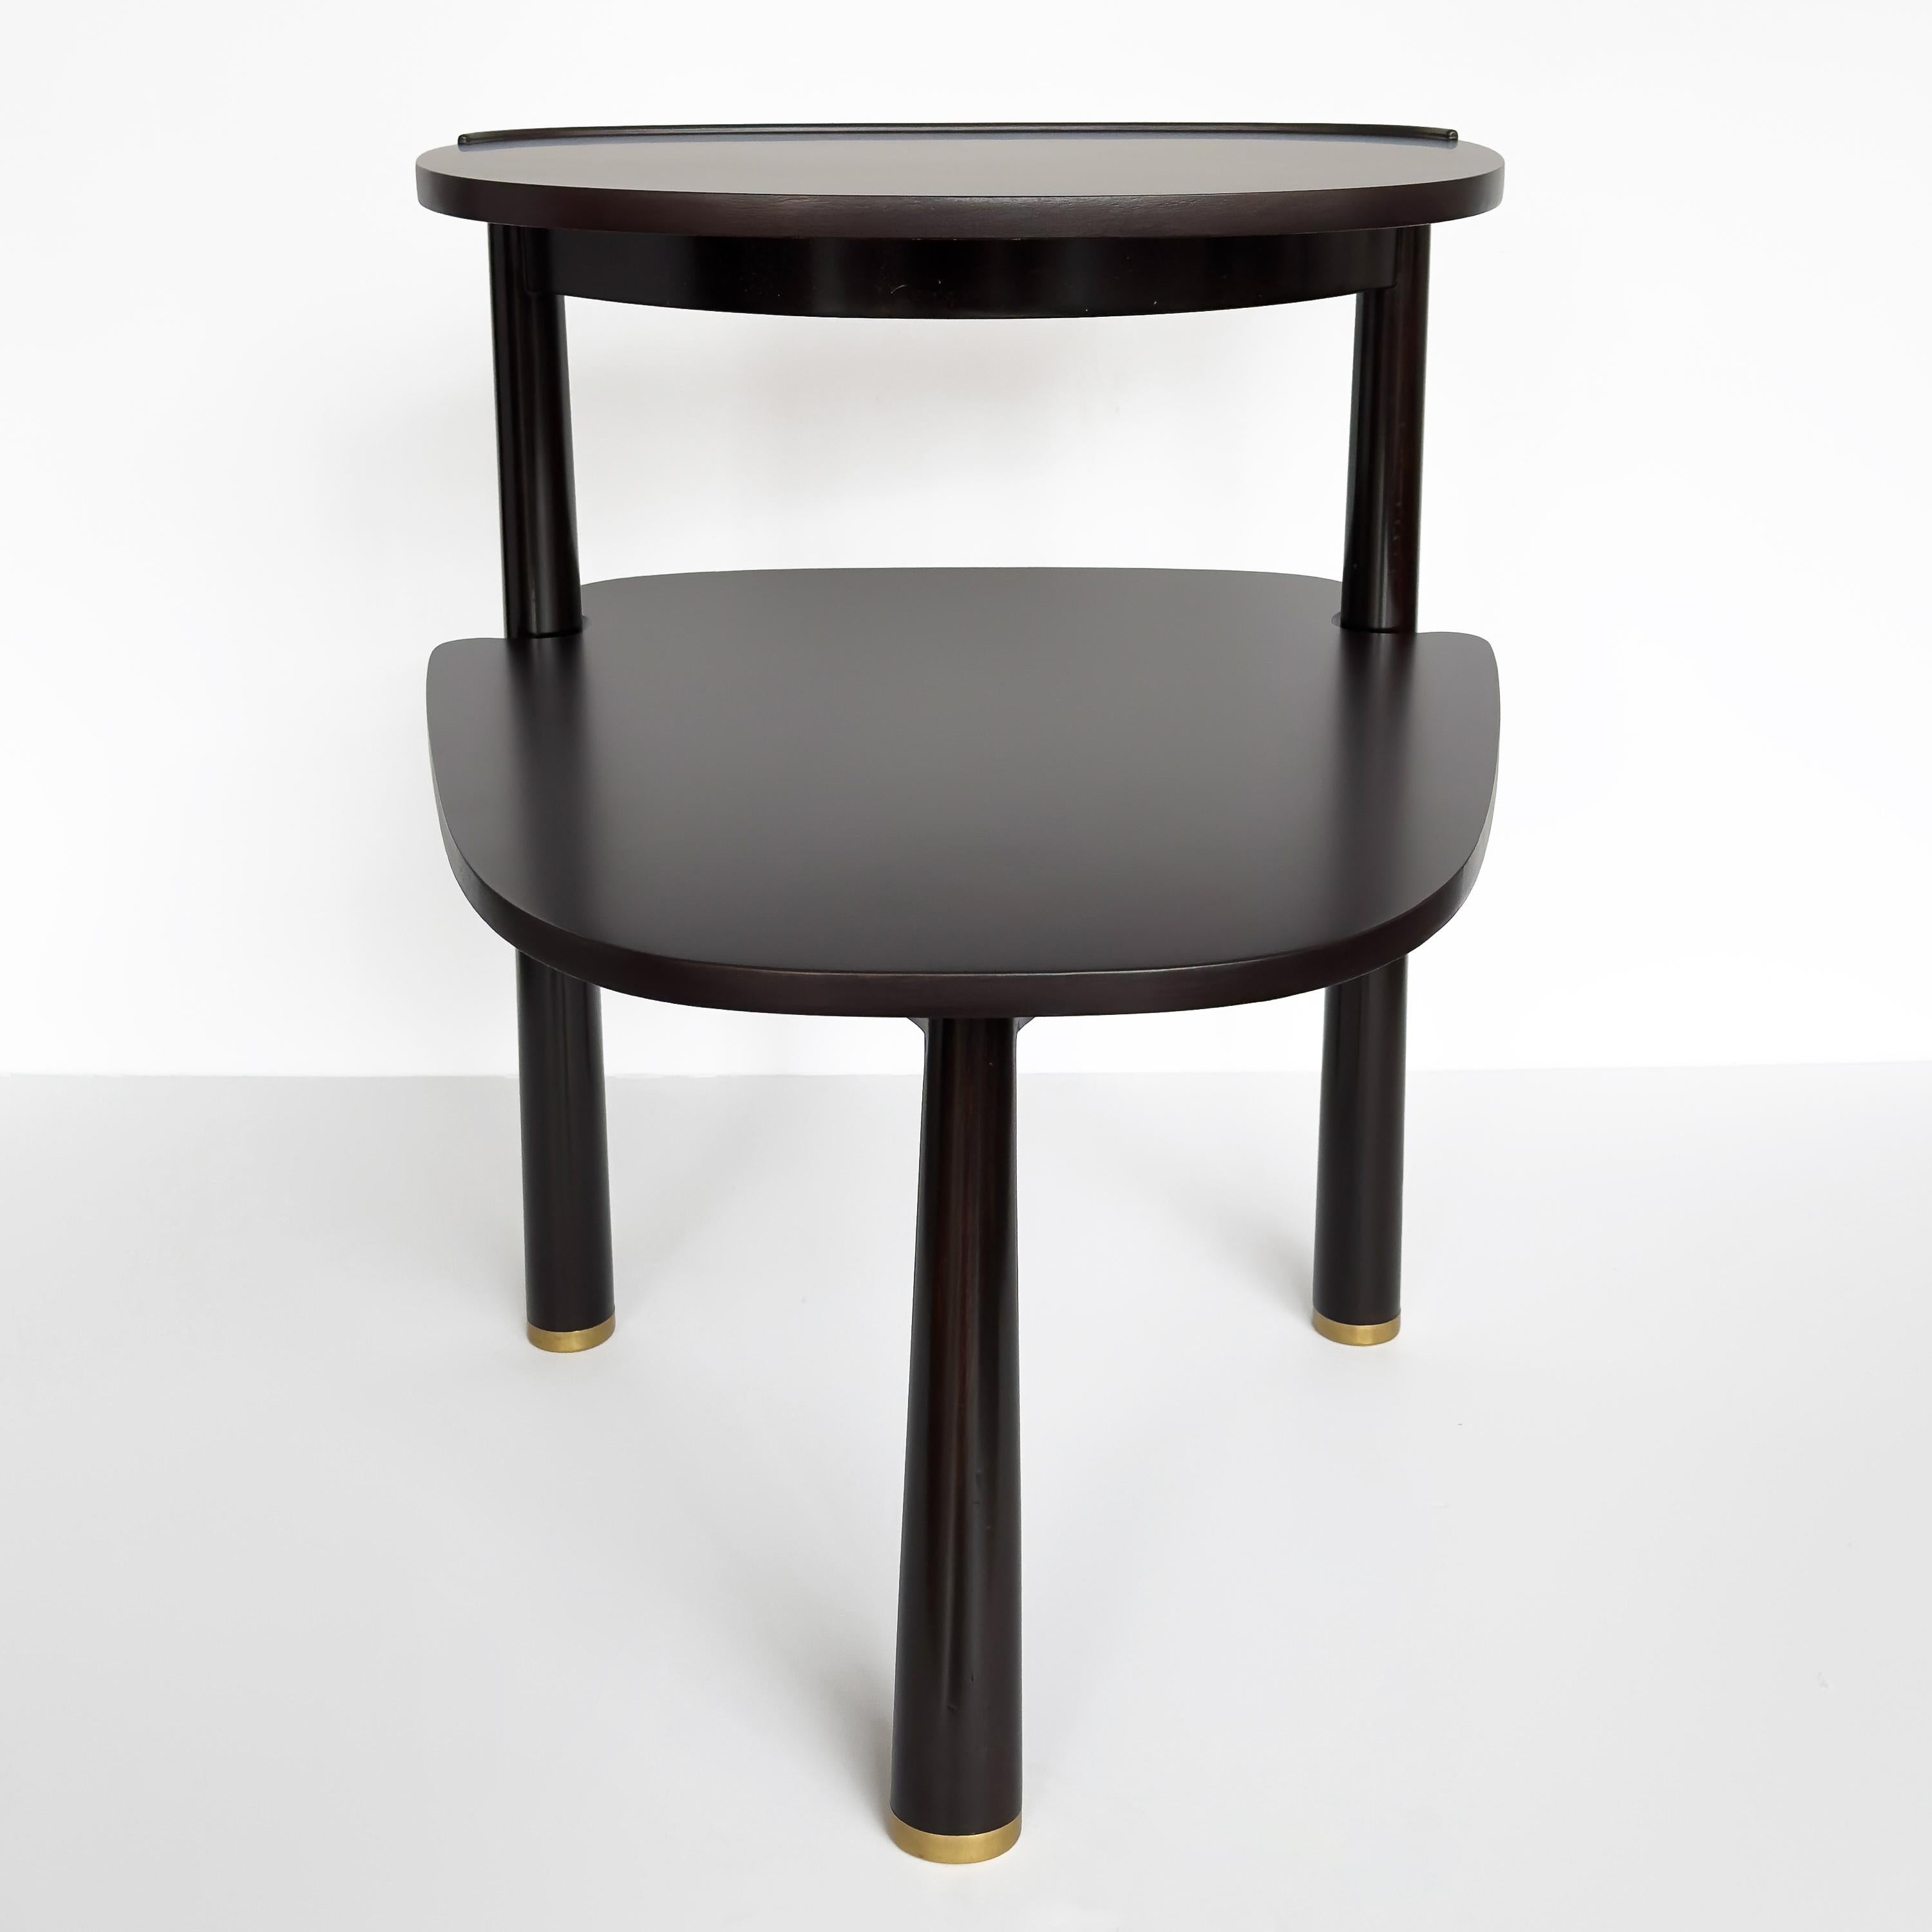 Mid-20th Century Rare Step End / Side Table by Edward Wormley for Dunbar